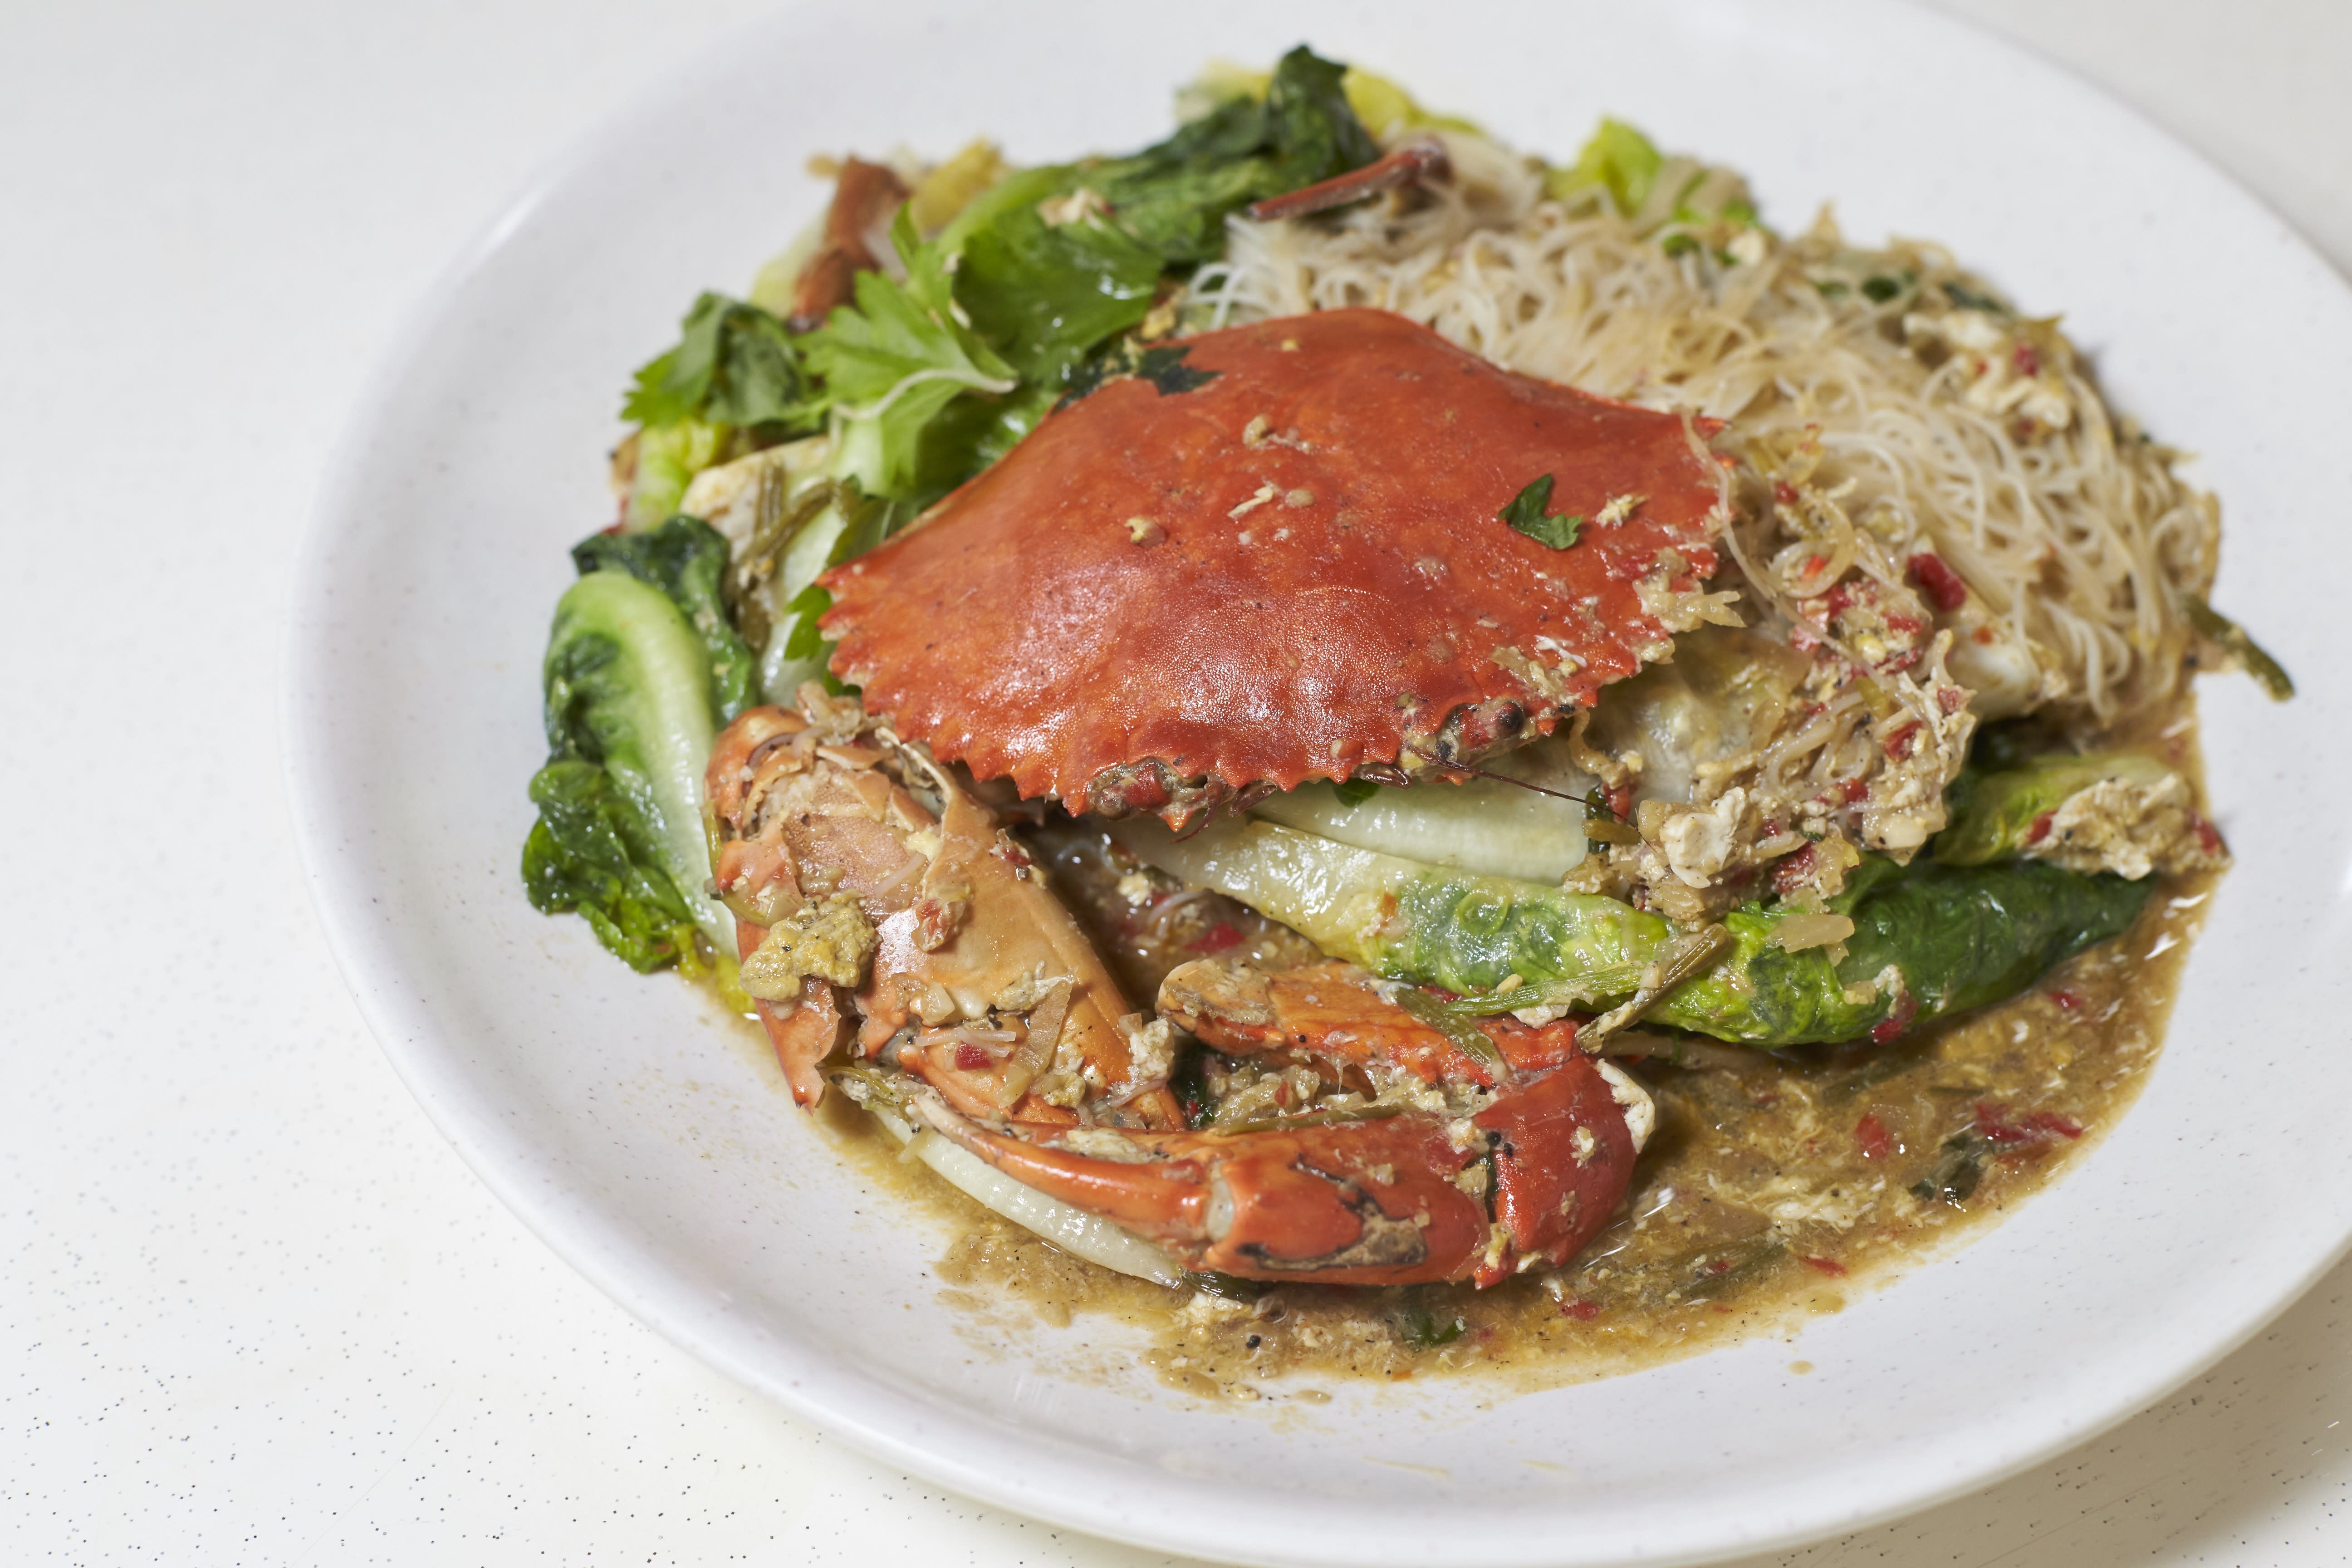 Former Towkay Of Don Pies Now Cooks Crabs In A Kopitiam - 8days